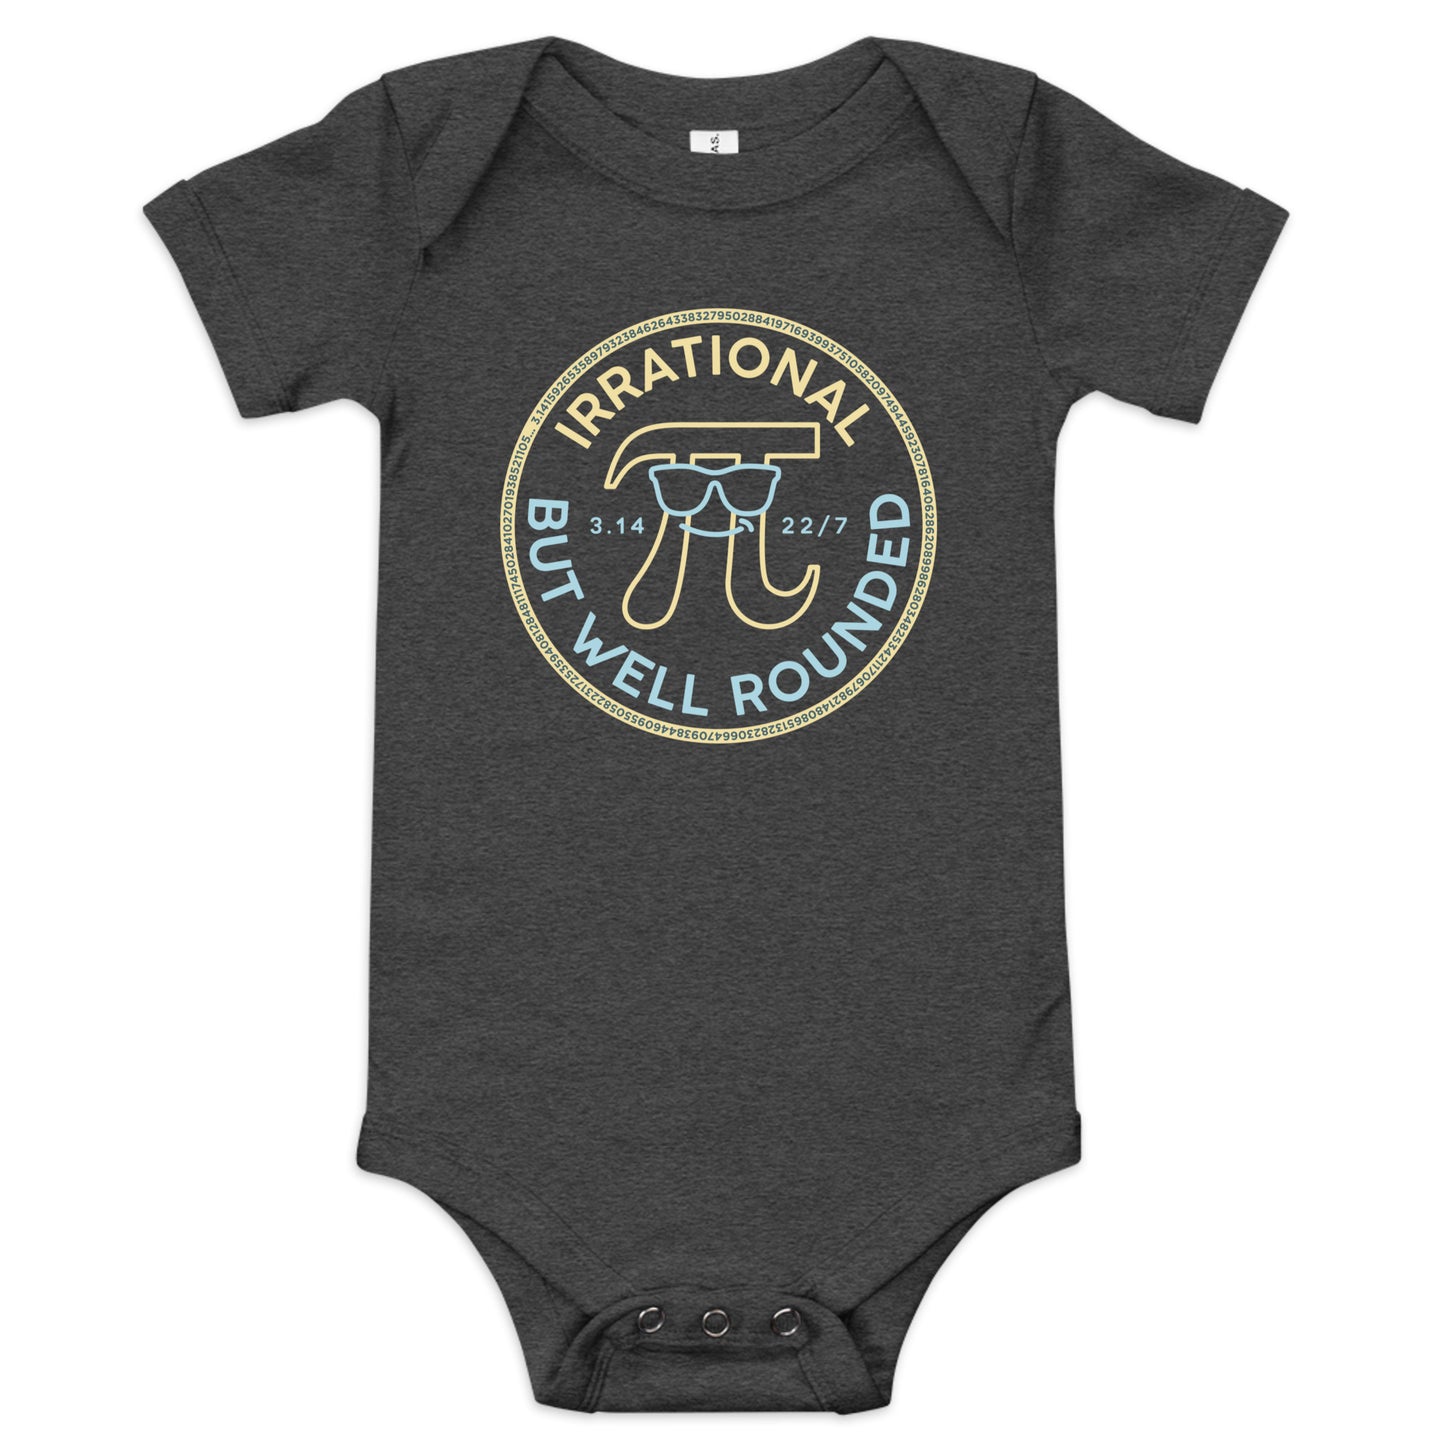 Irrational But Well Rounded Kid's Onesie